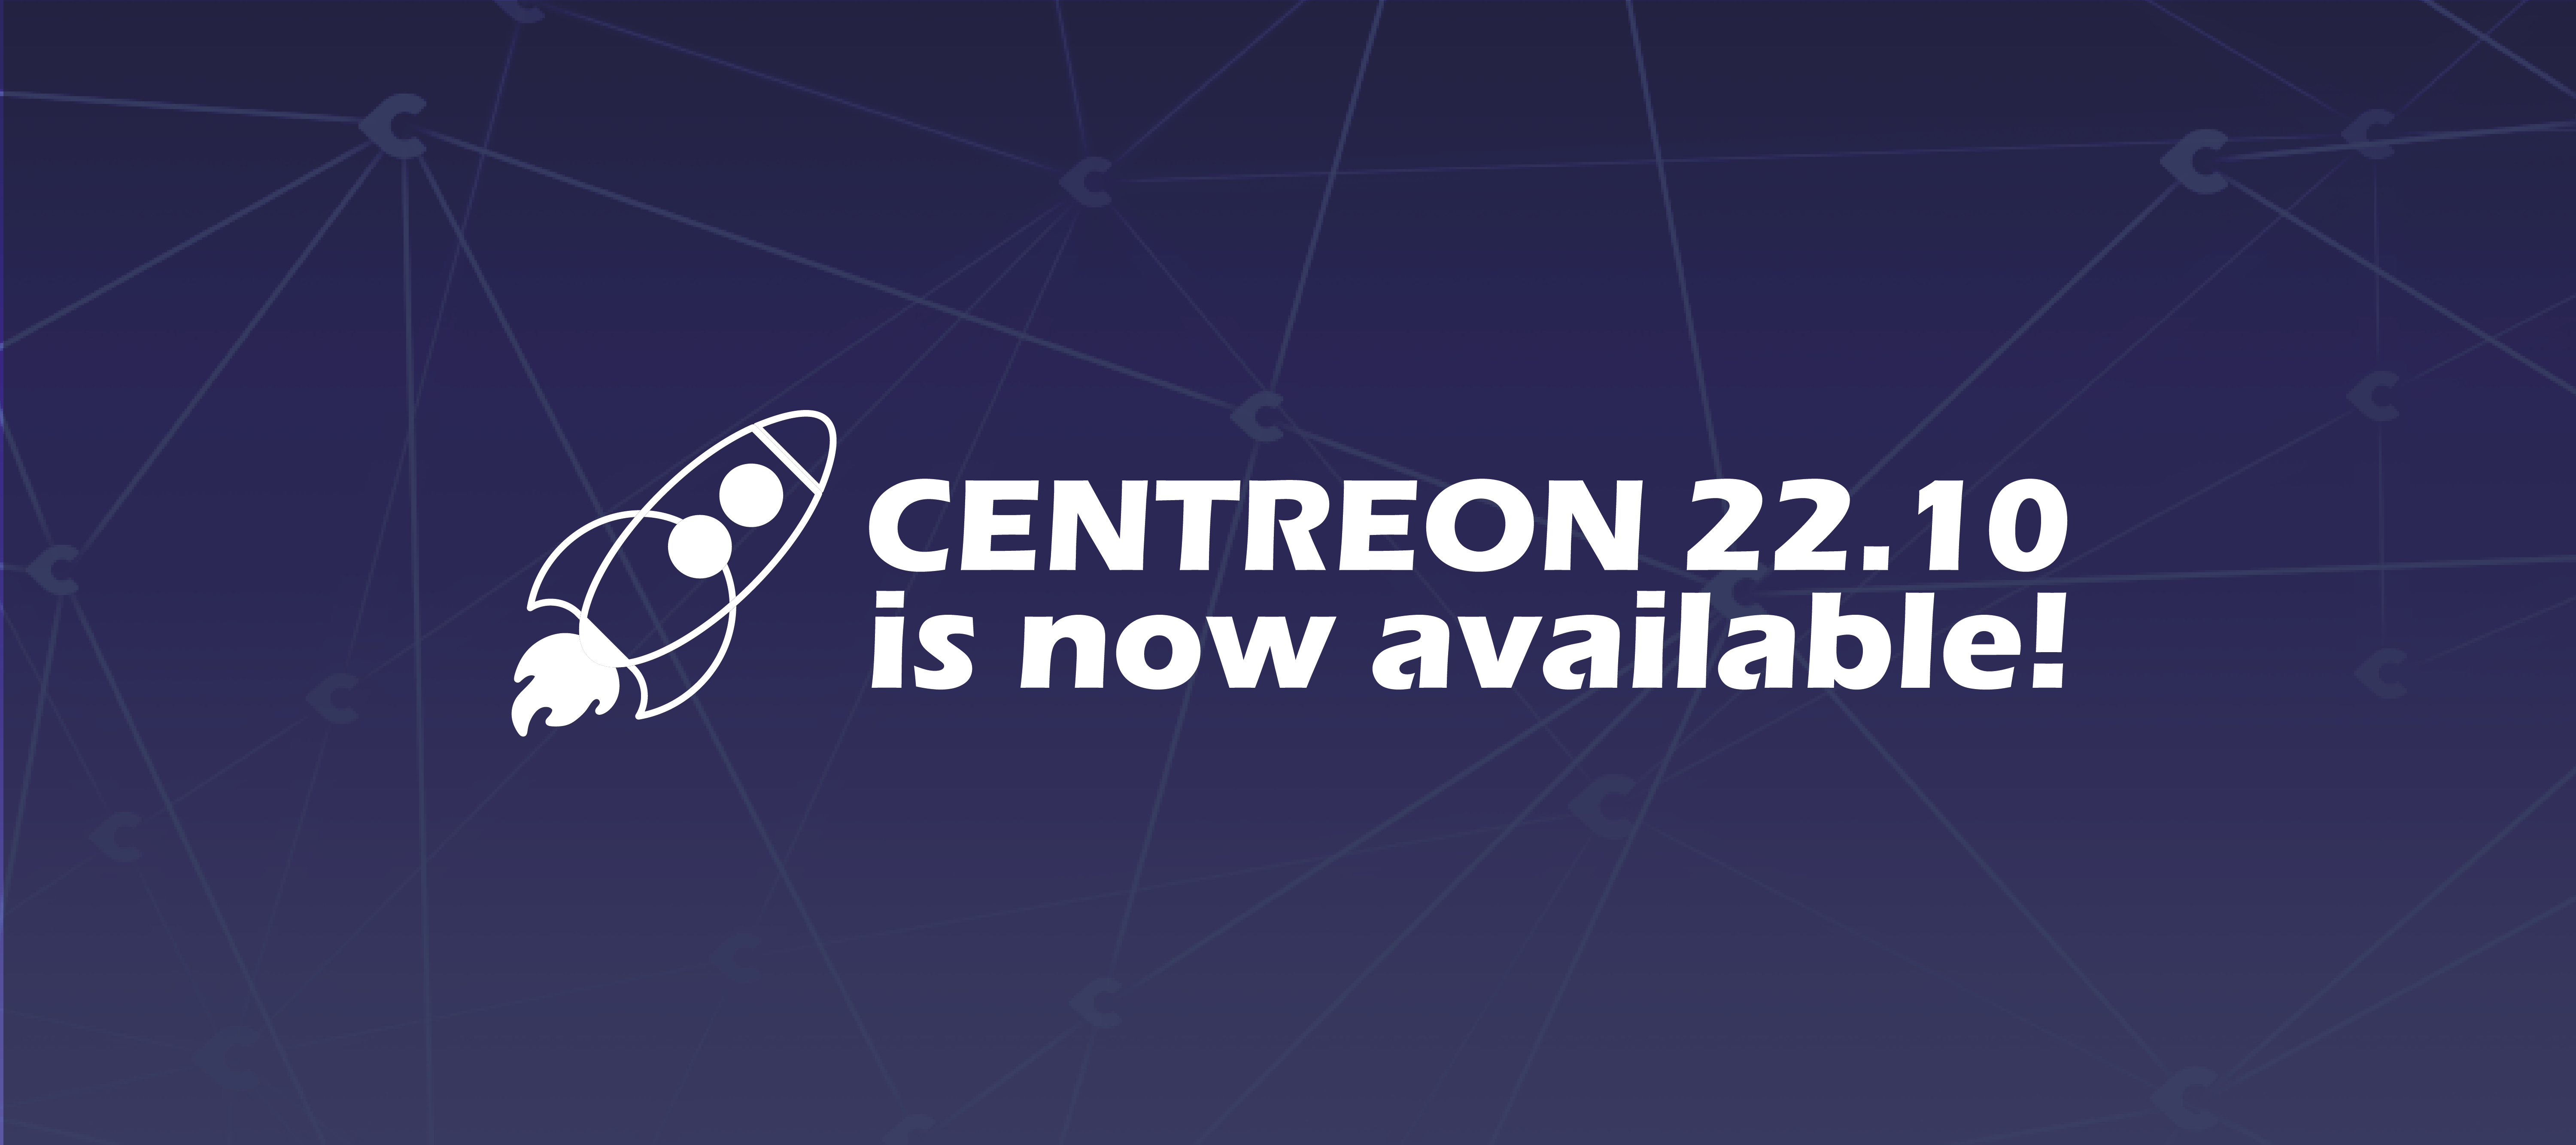 Centreon Fall’22: What’s new in the 22.10 software version?